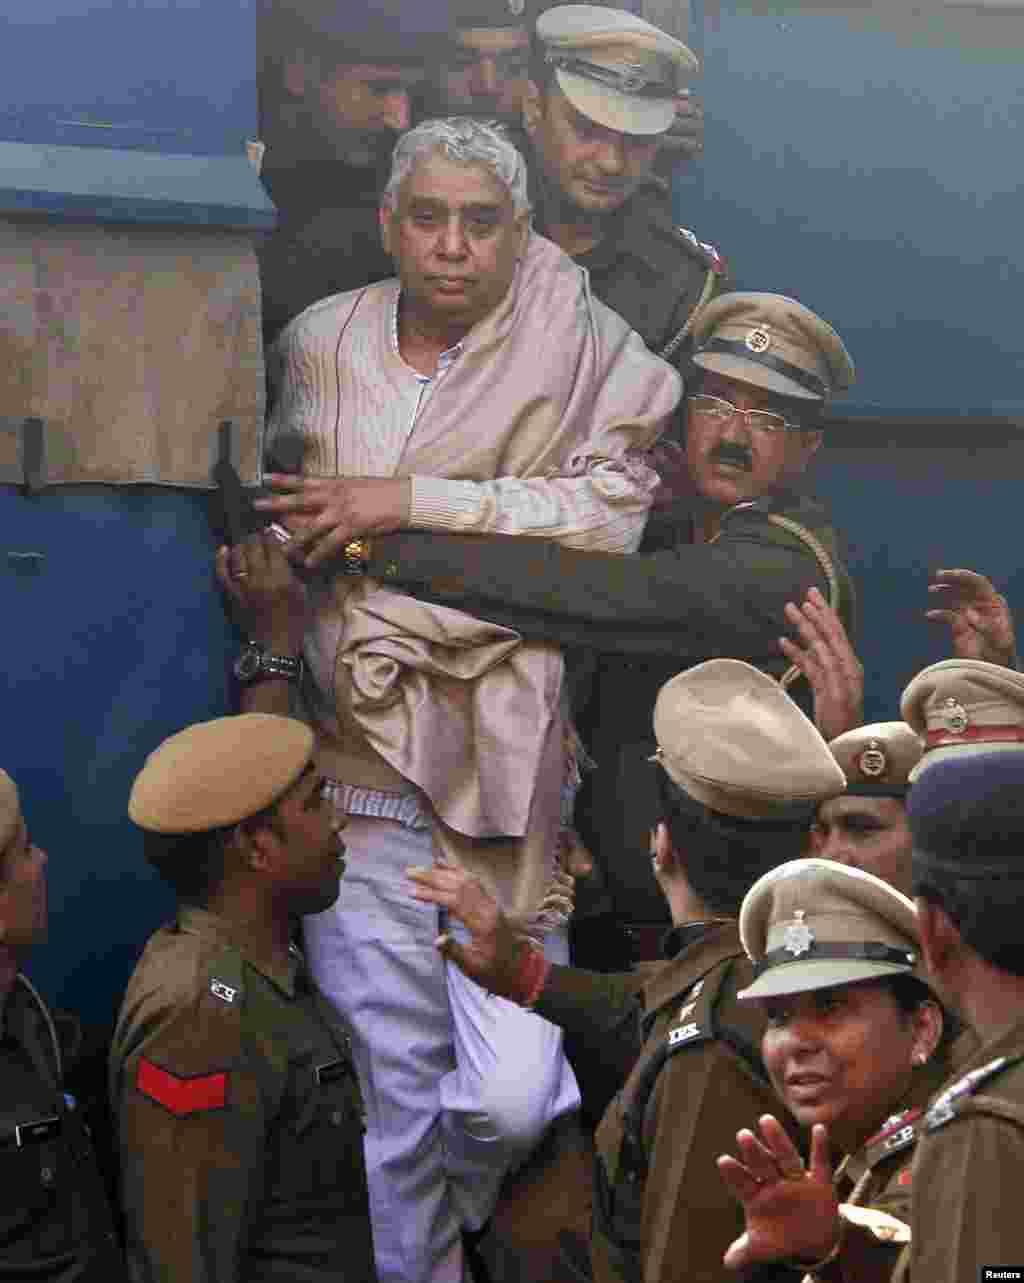 Satguru Rampalji Maharaj, a self-styled &quot;godman,&quot; is escorted to the high court after his arrest, in the northern Indian city of Chandigarh. A self-styled Indian religious leader was charged with sedition and waging war against the state after a days-long siege of his sprawling compound ended in his arrest along with 450 followers.